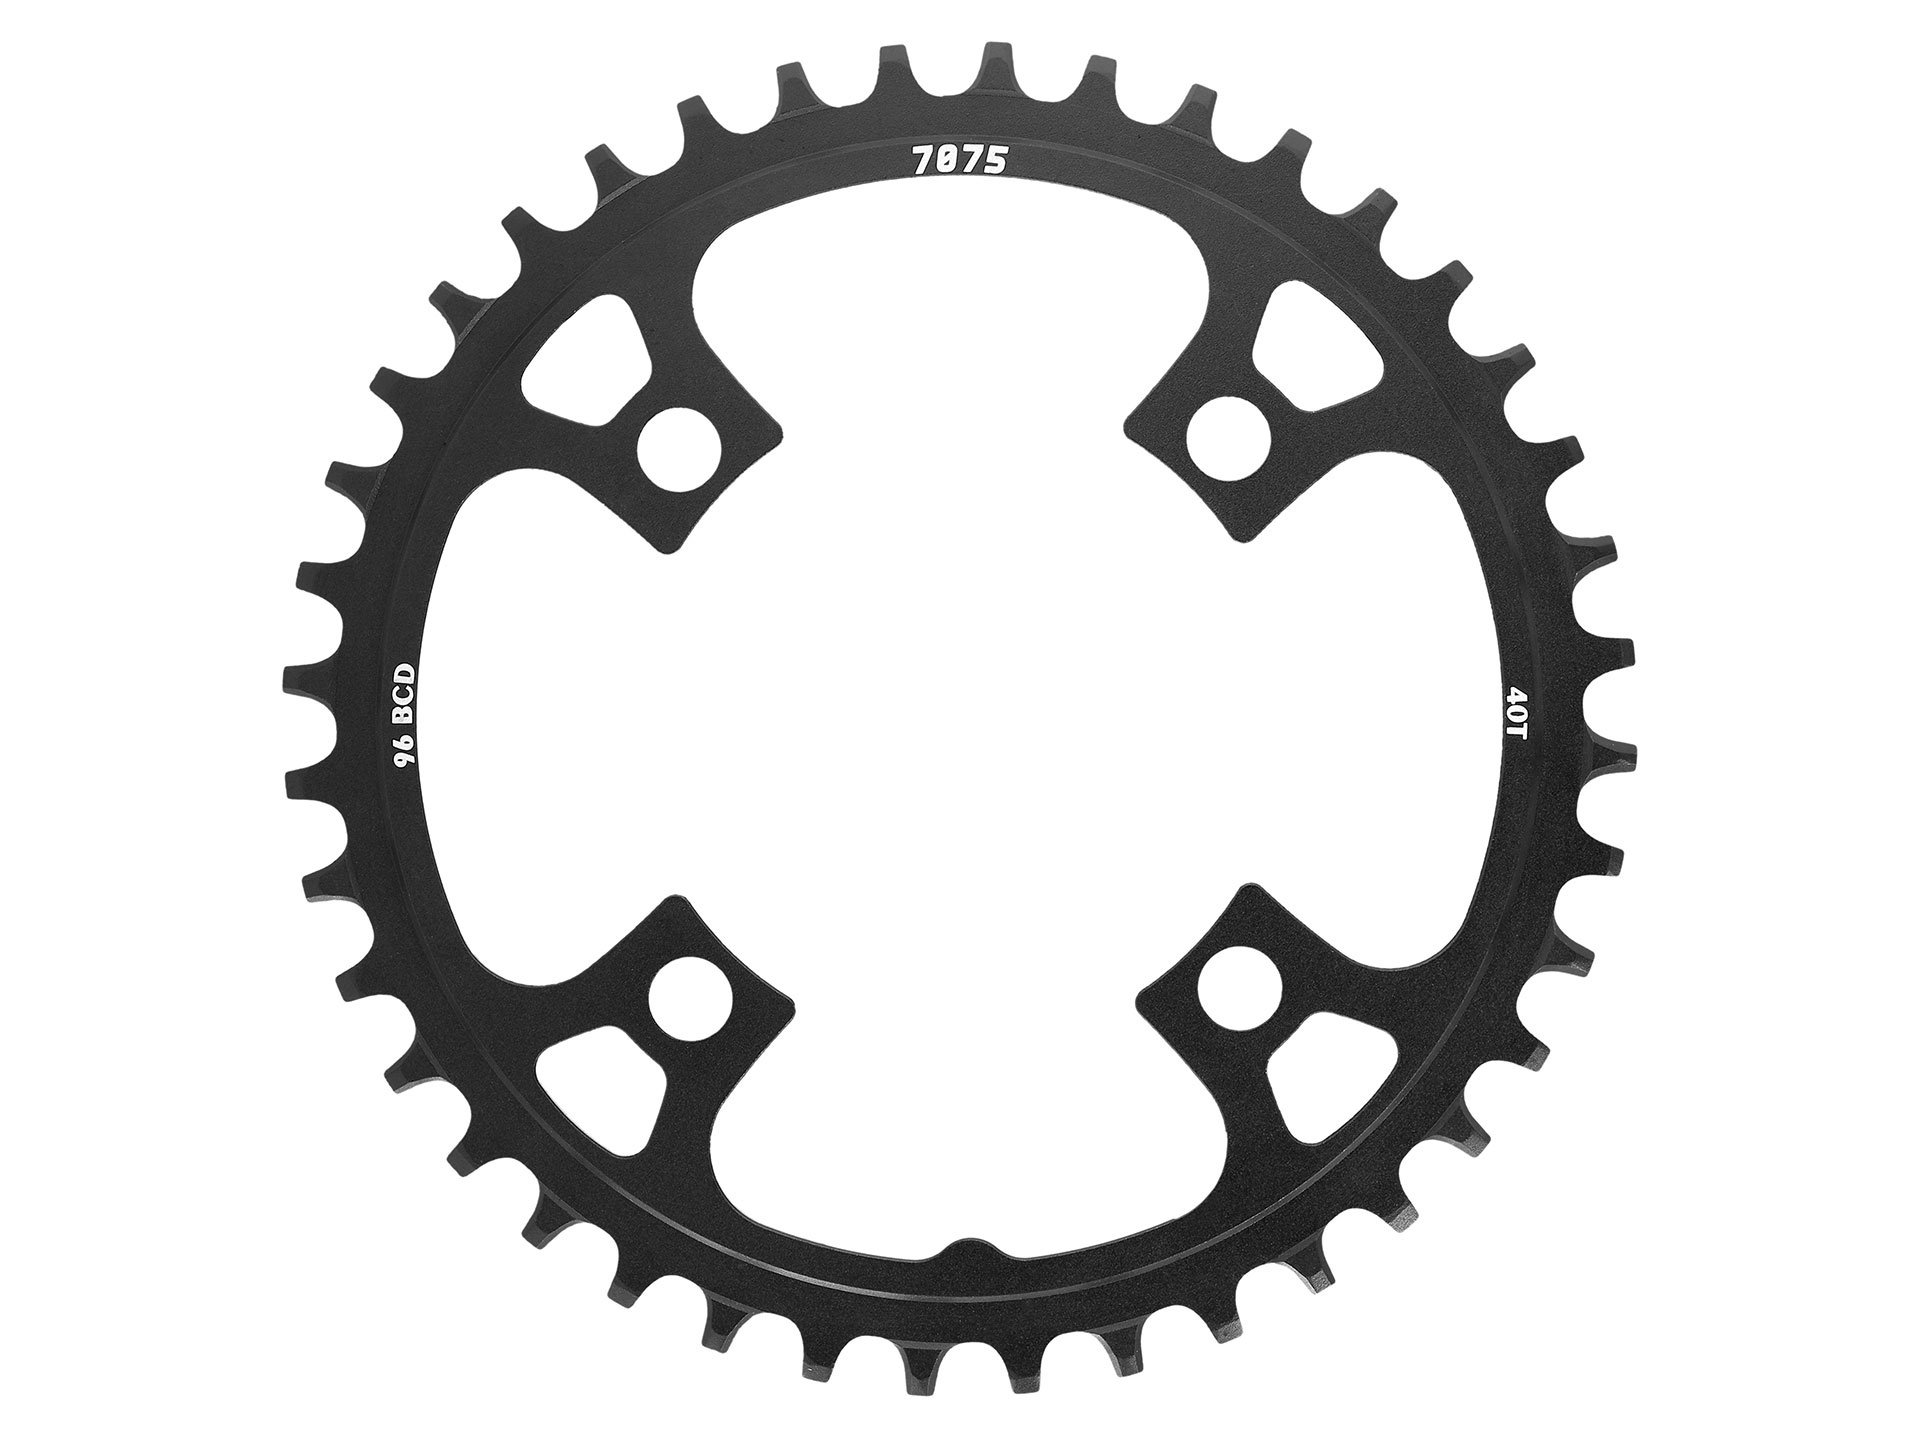 38T 96 BCD Narrow-Wide Alloy Chainring Black Sunrace